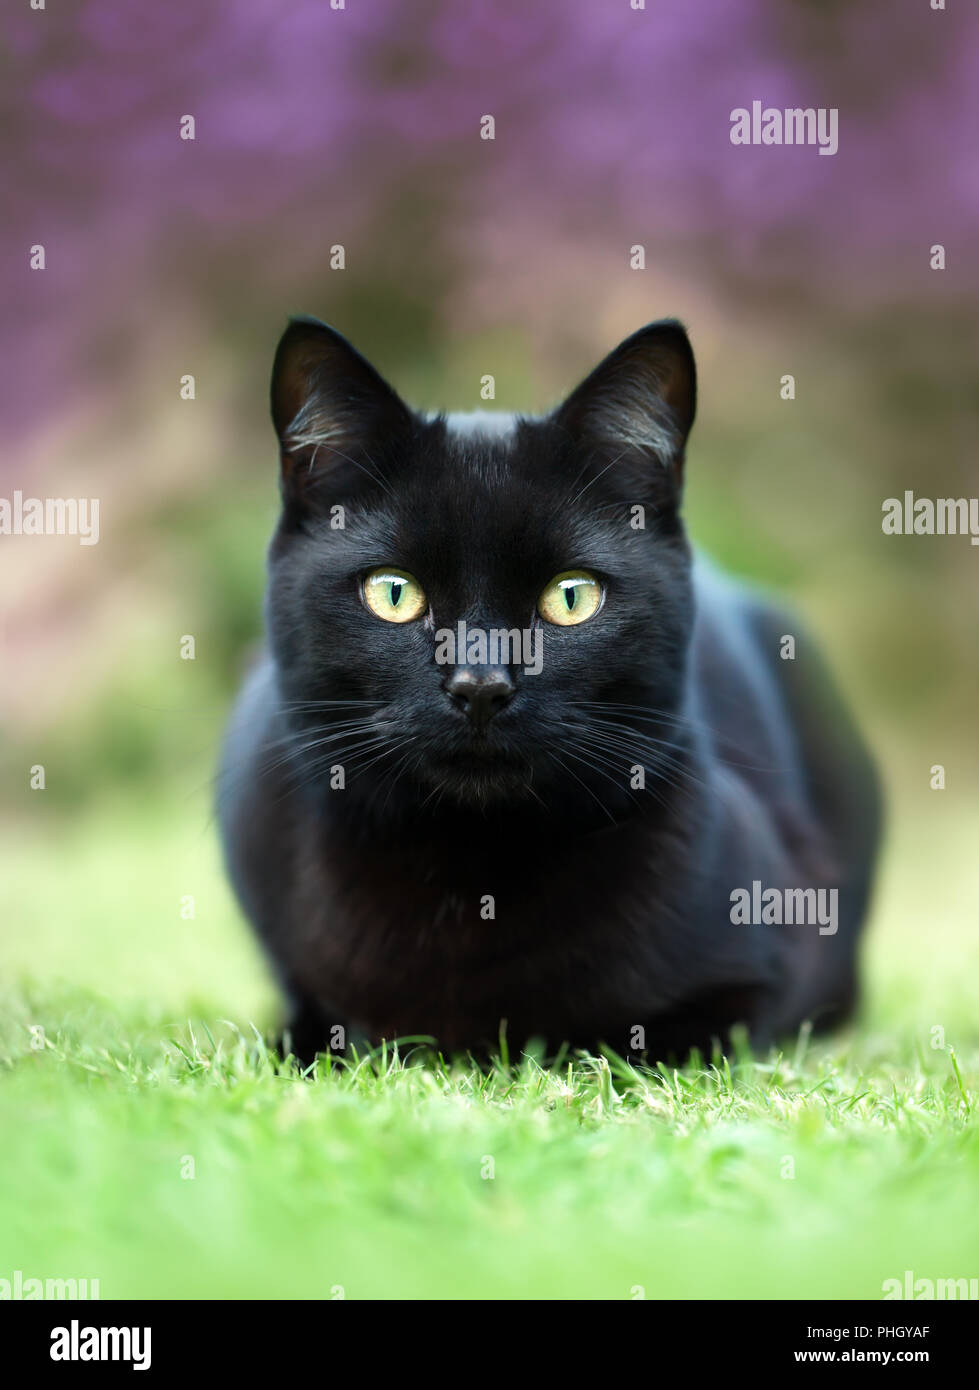 Close up of a black cat lying on the grass in the garden against purple flowers, UK Stock Photo